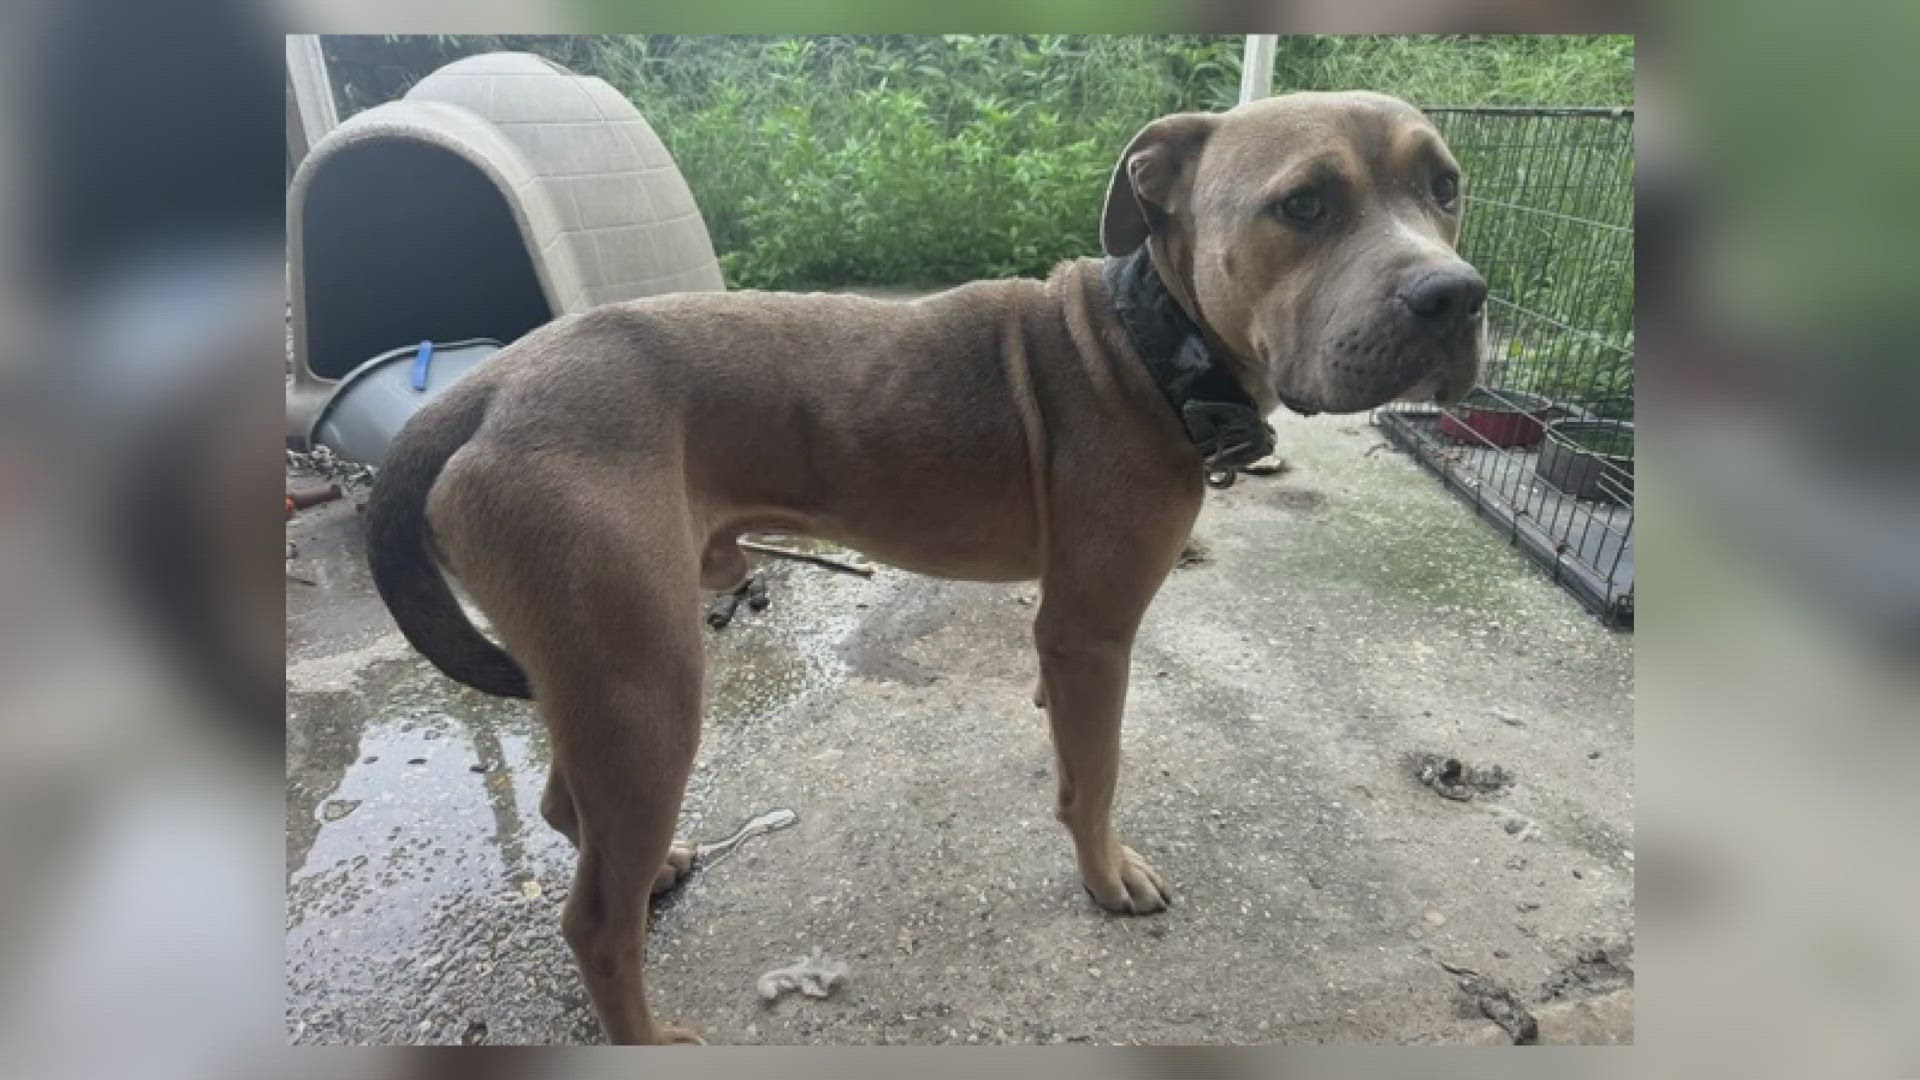 A man is facing charges of animal cruelty after New Orleans Police found the dog tied up in horrible conditions.